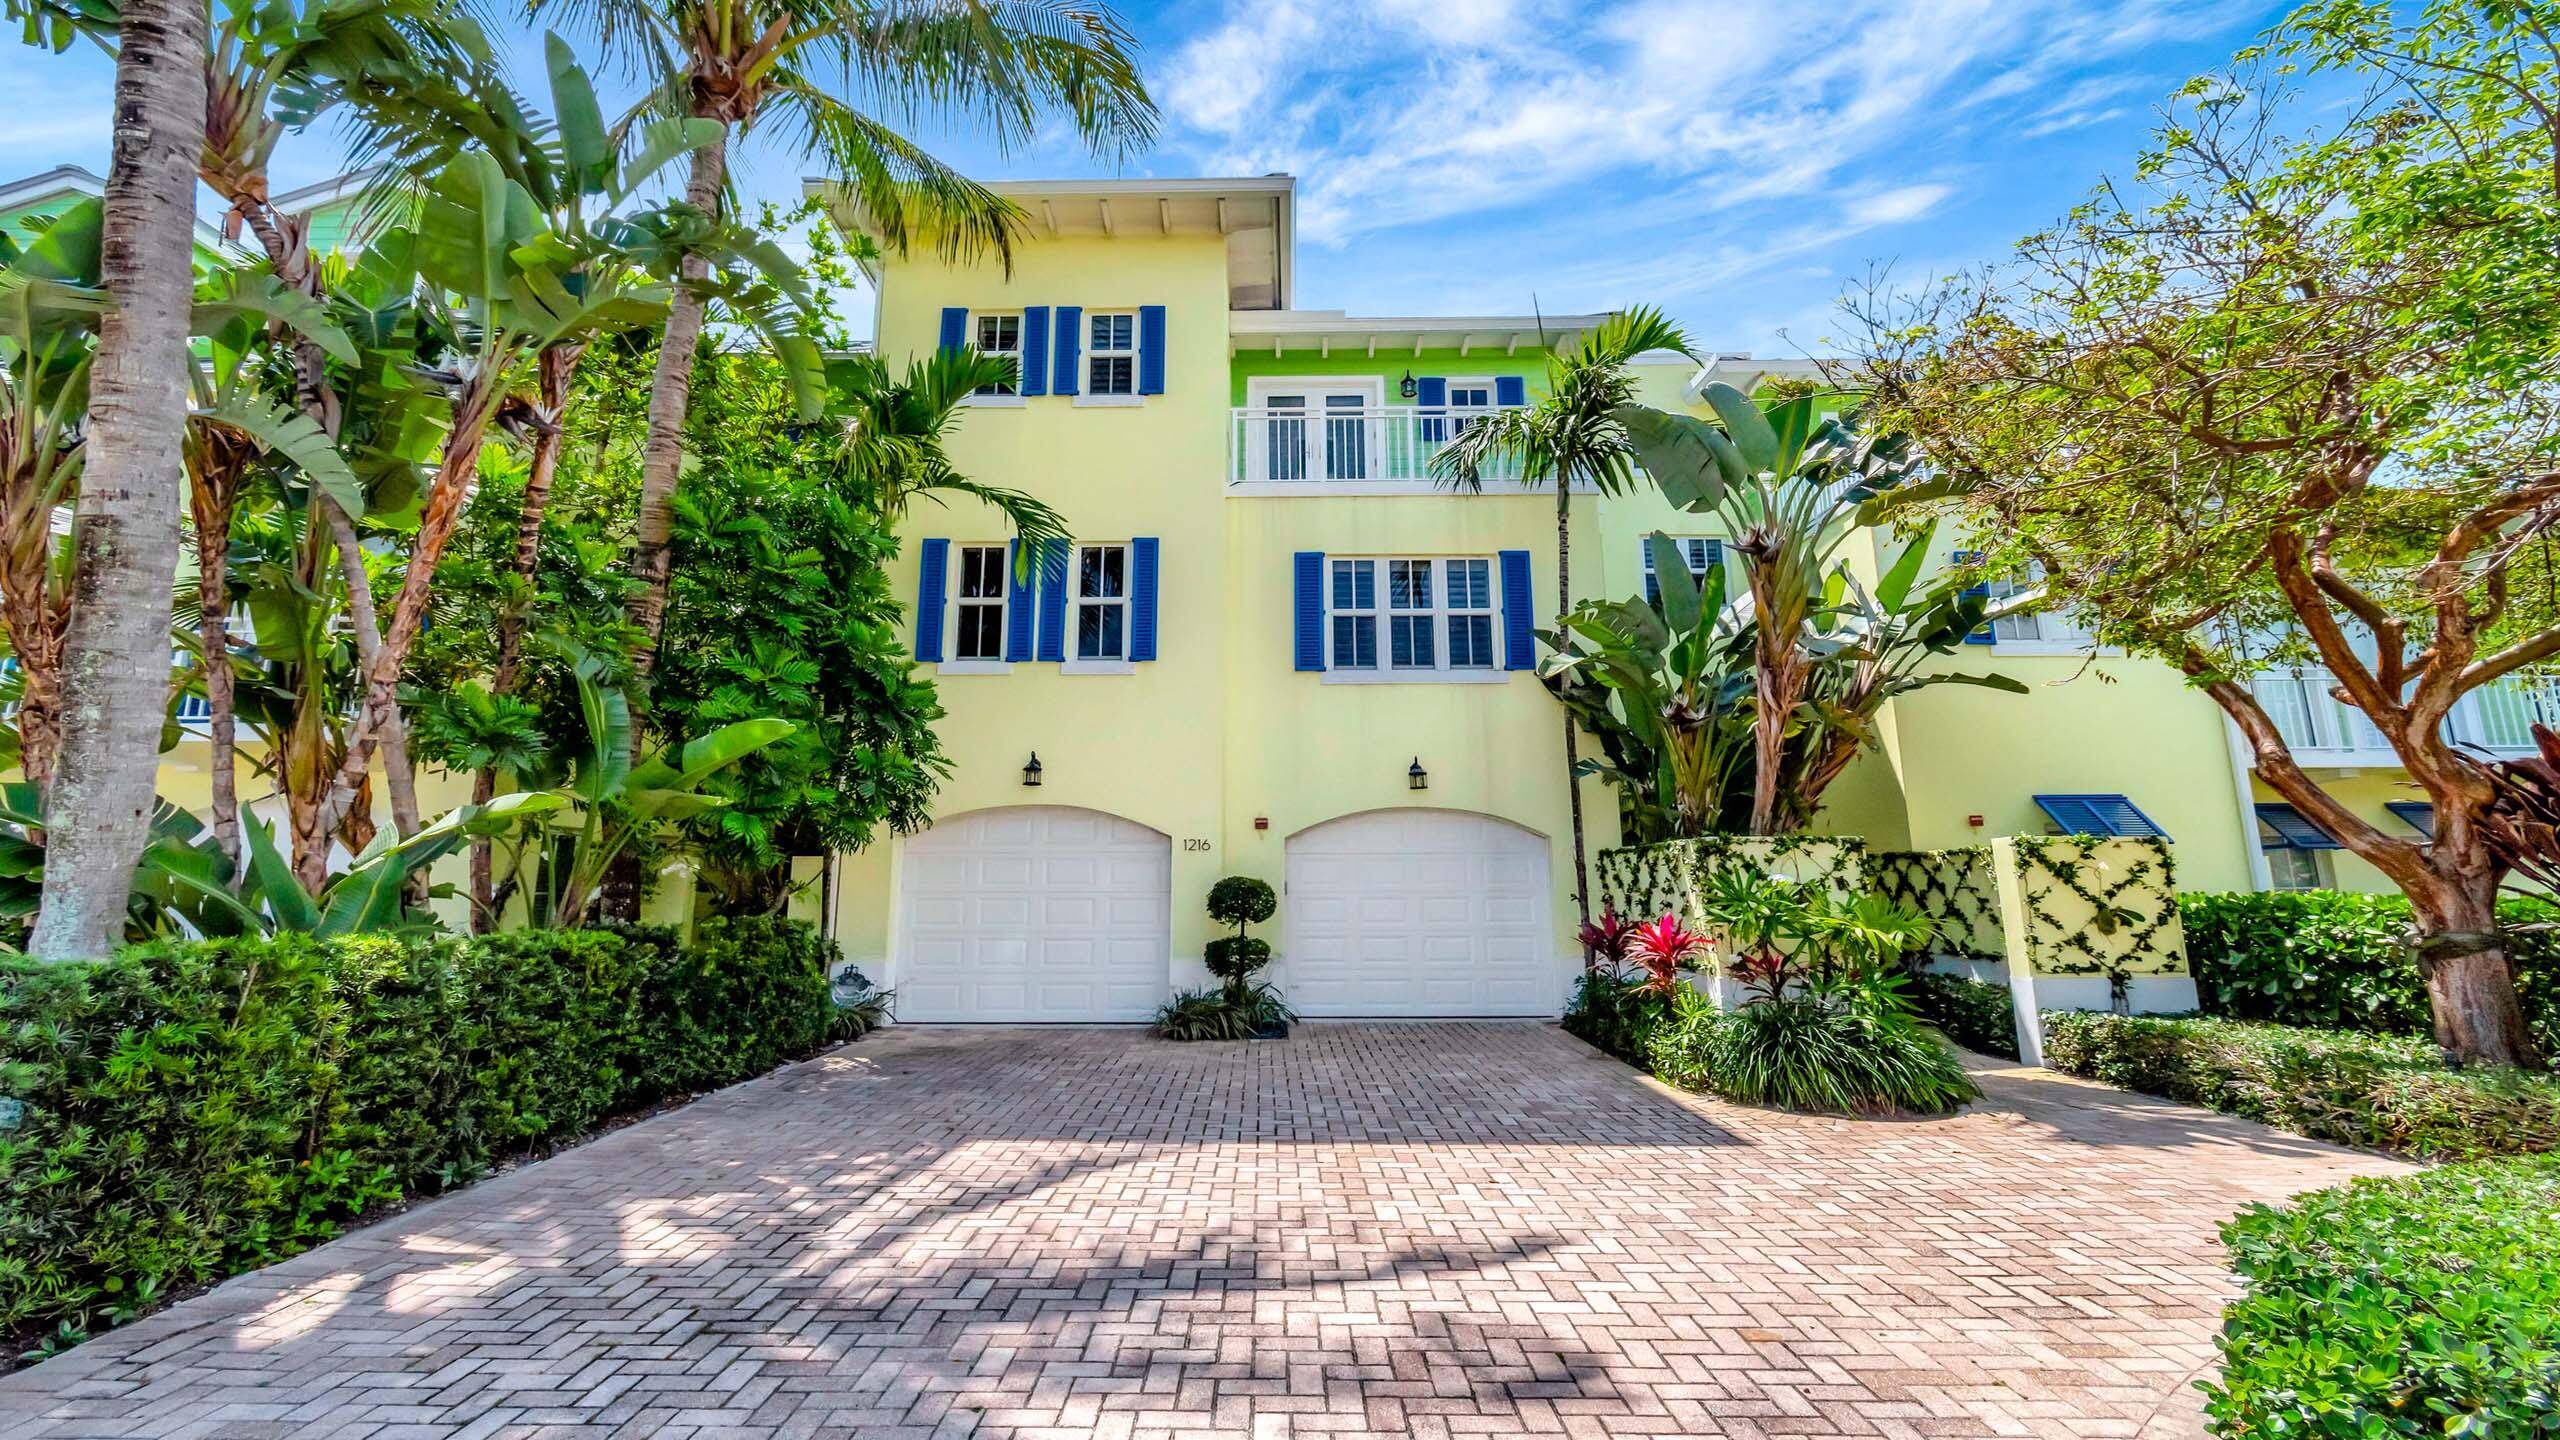 Recently updated and offered furnished, this East Delray Beach townhome is just one block to the beach and less than a mile to Atlantic Ave.